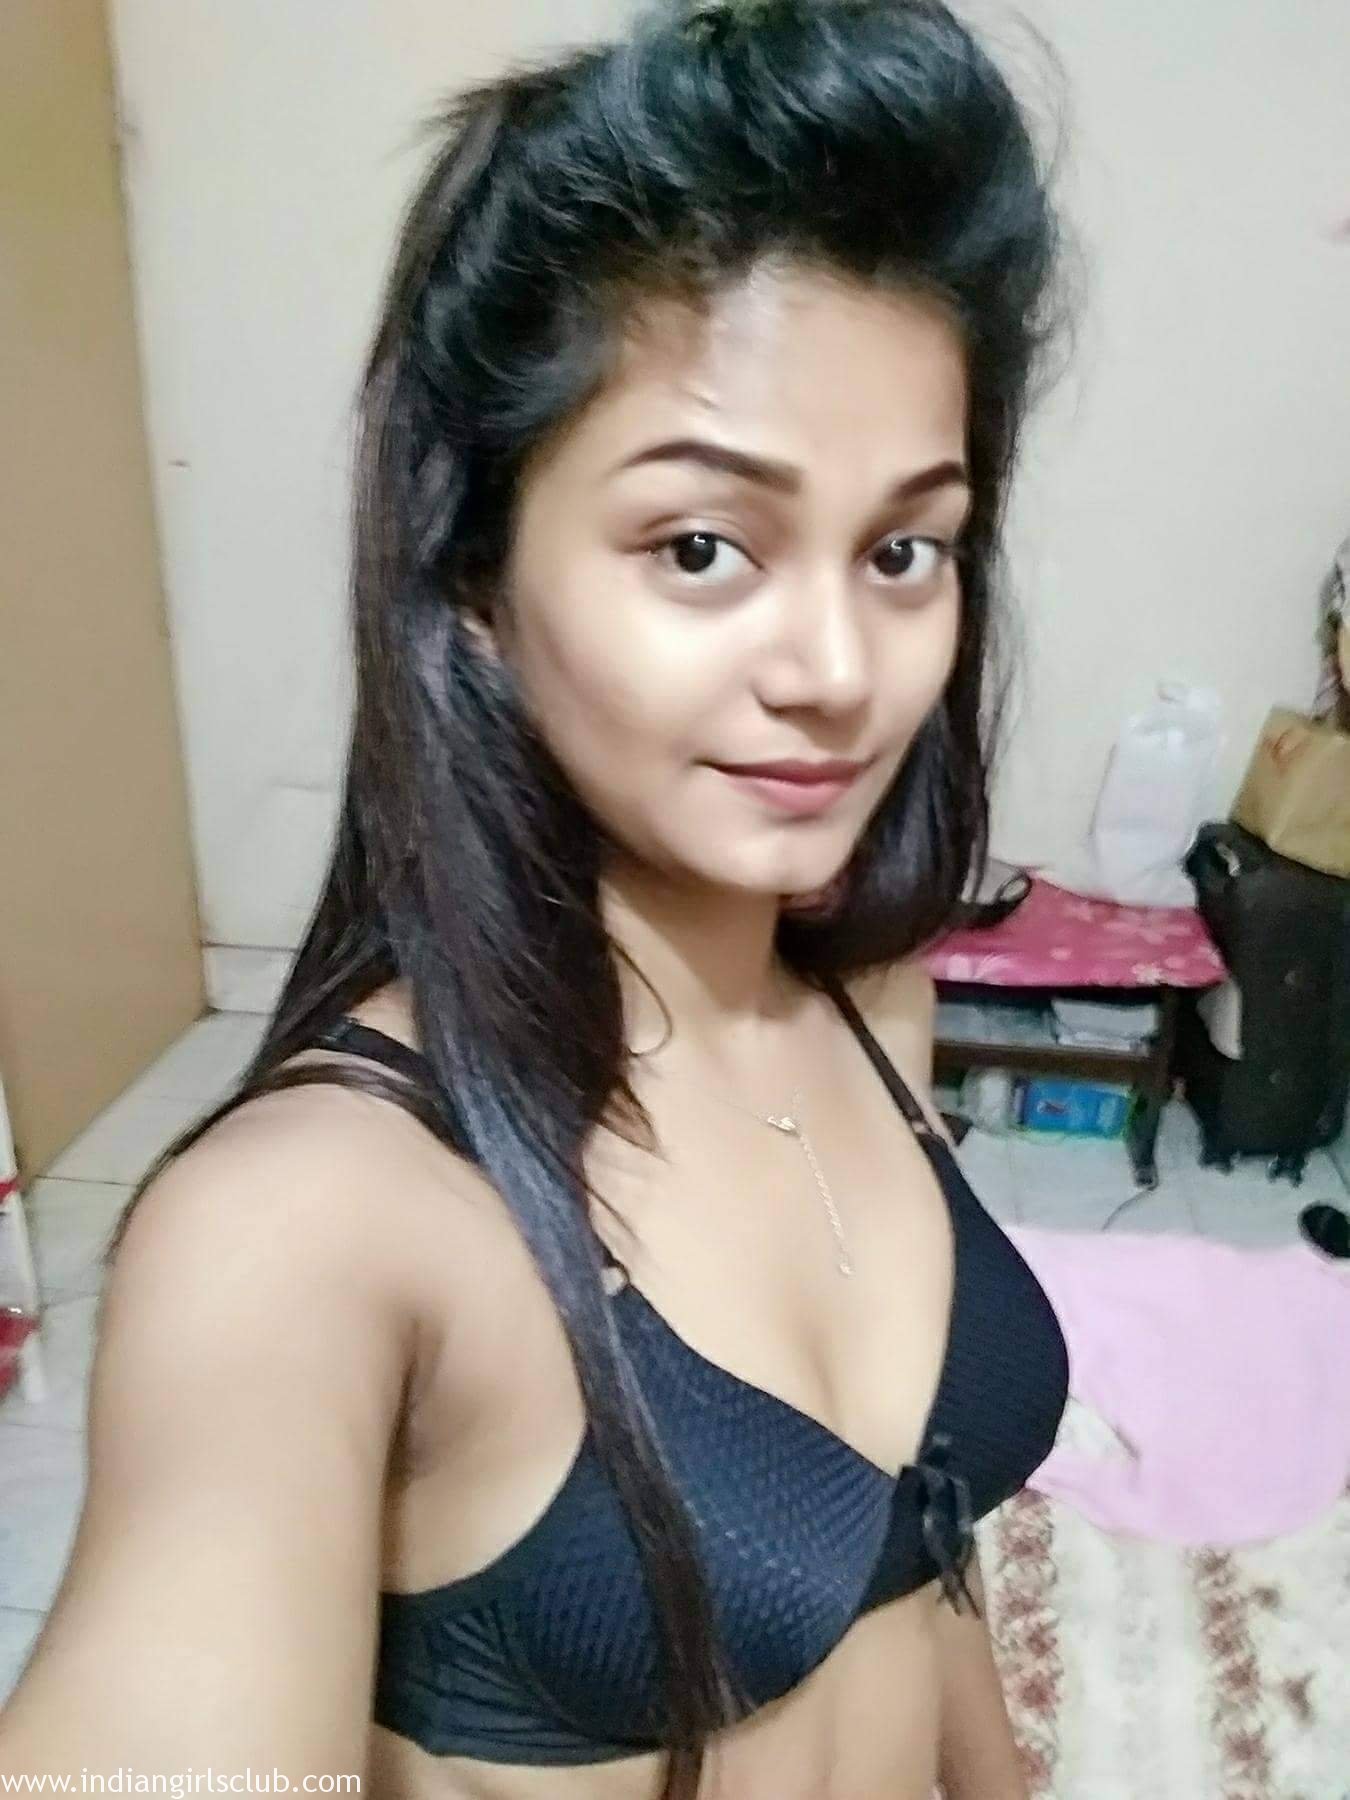 Indian College Girl Vidioes Sex - Indian College Girl Hot Sex With Her Lover - Indian Girls Club